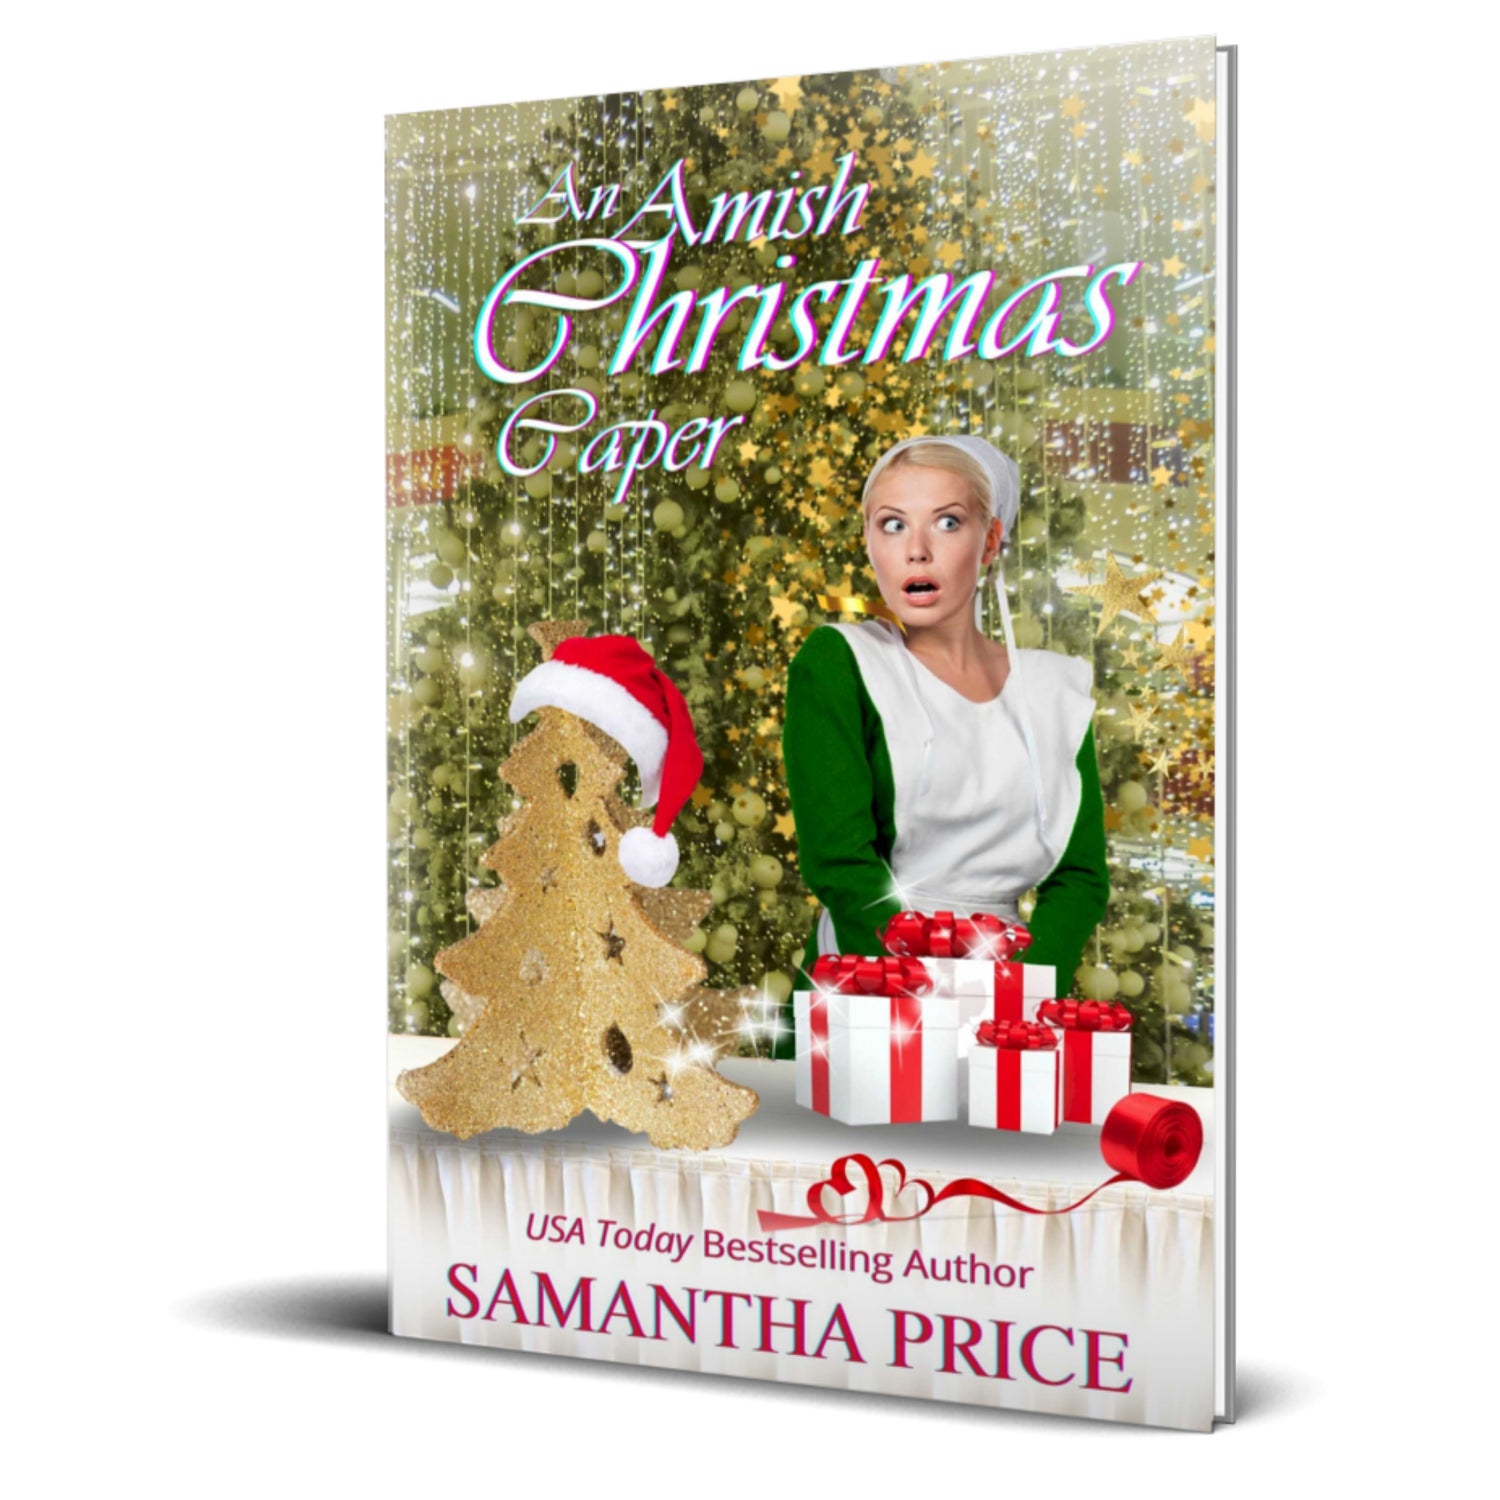 An Amish Christmas Caper (PAPERBACK)